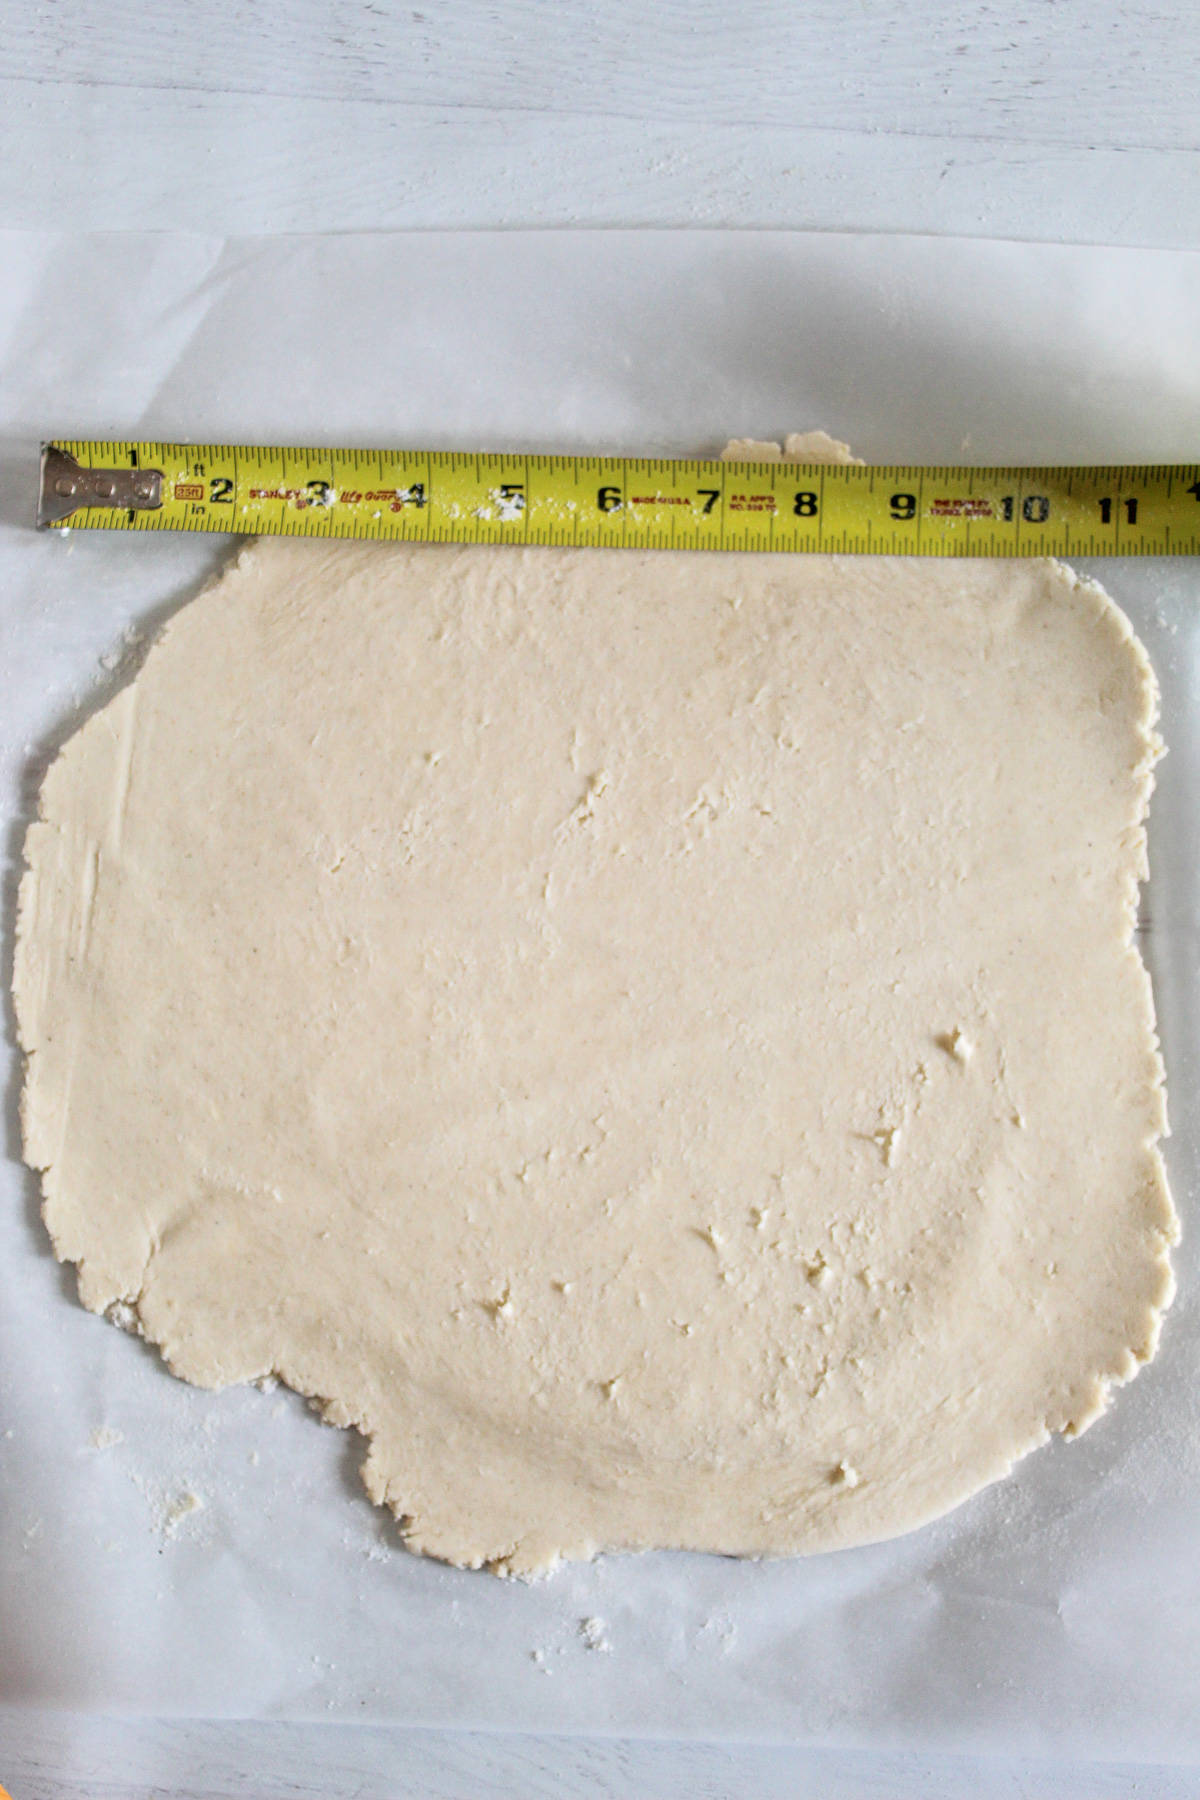 rolled dough measured to 11 inches